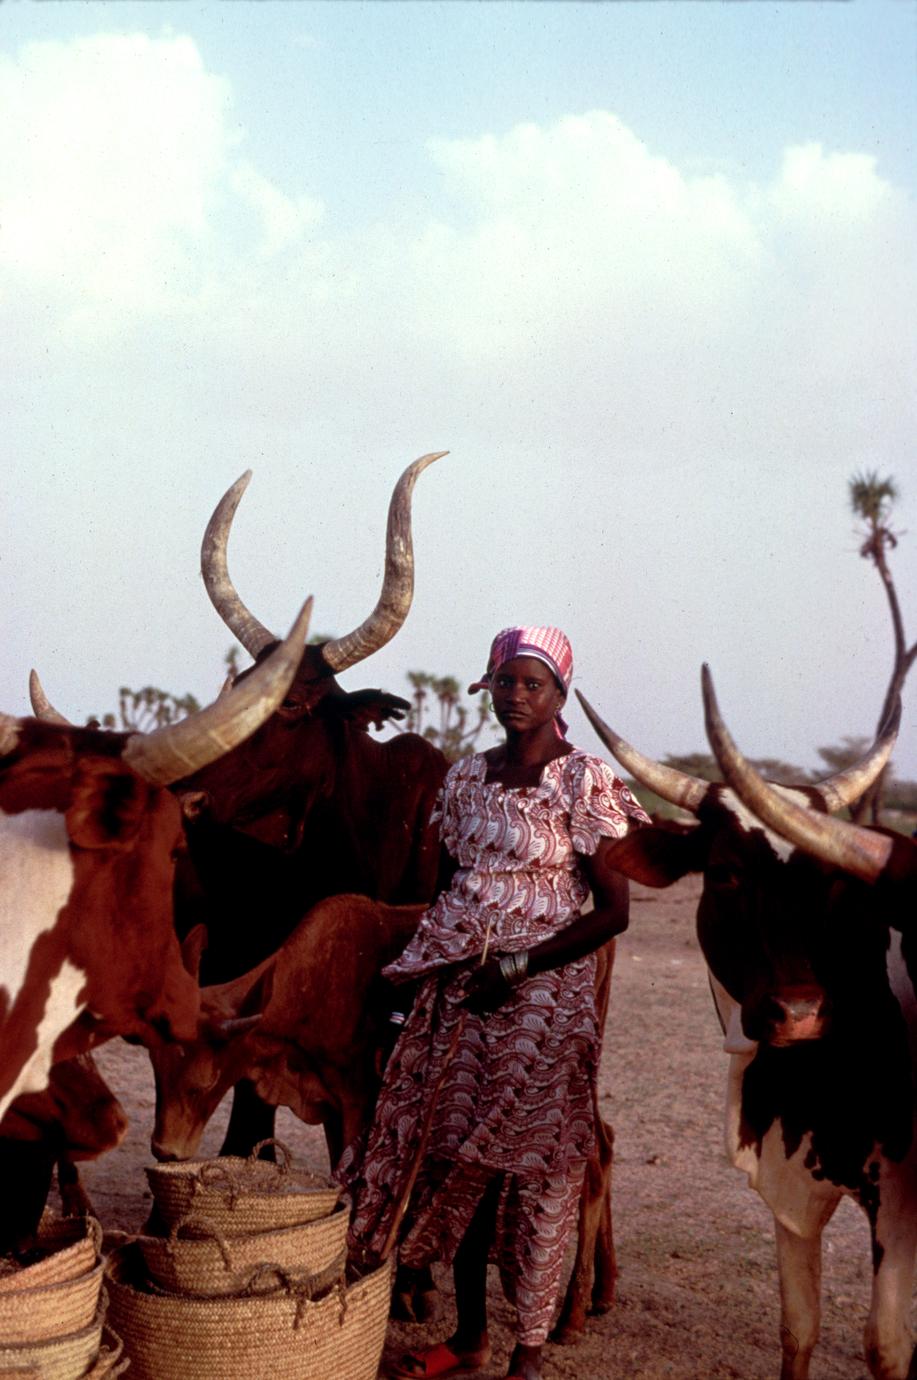 Hausa Woman Taking Baskets of Chaff and Bran to Her Zebu Cattle